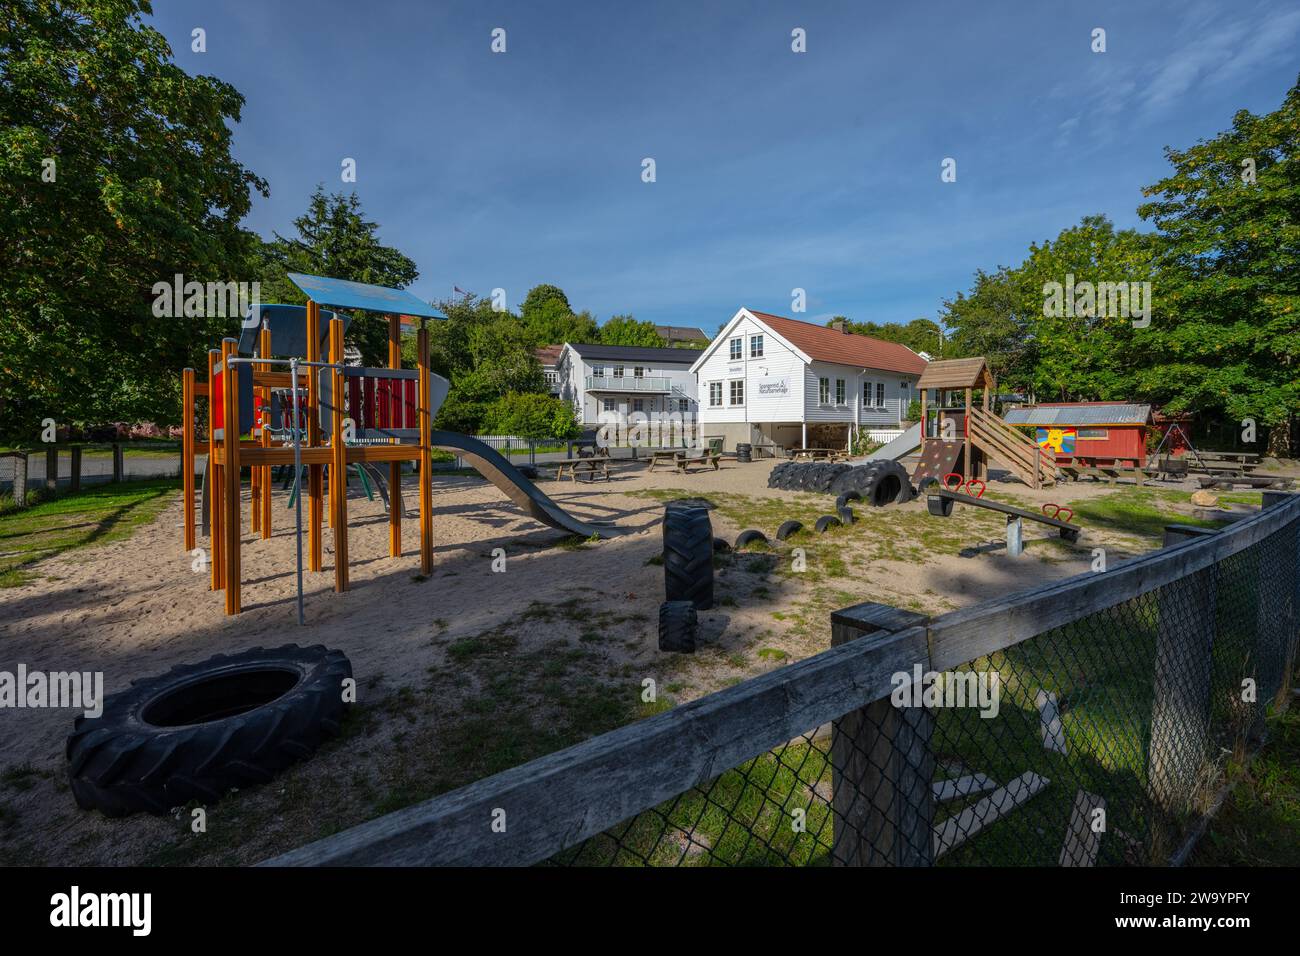 Lindesnes, Norway - August 09 2022: Playground of a daycare center Stock Photo